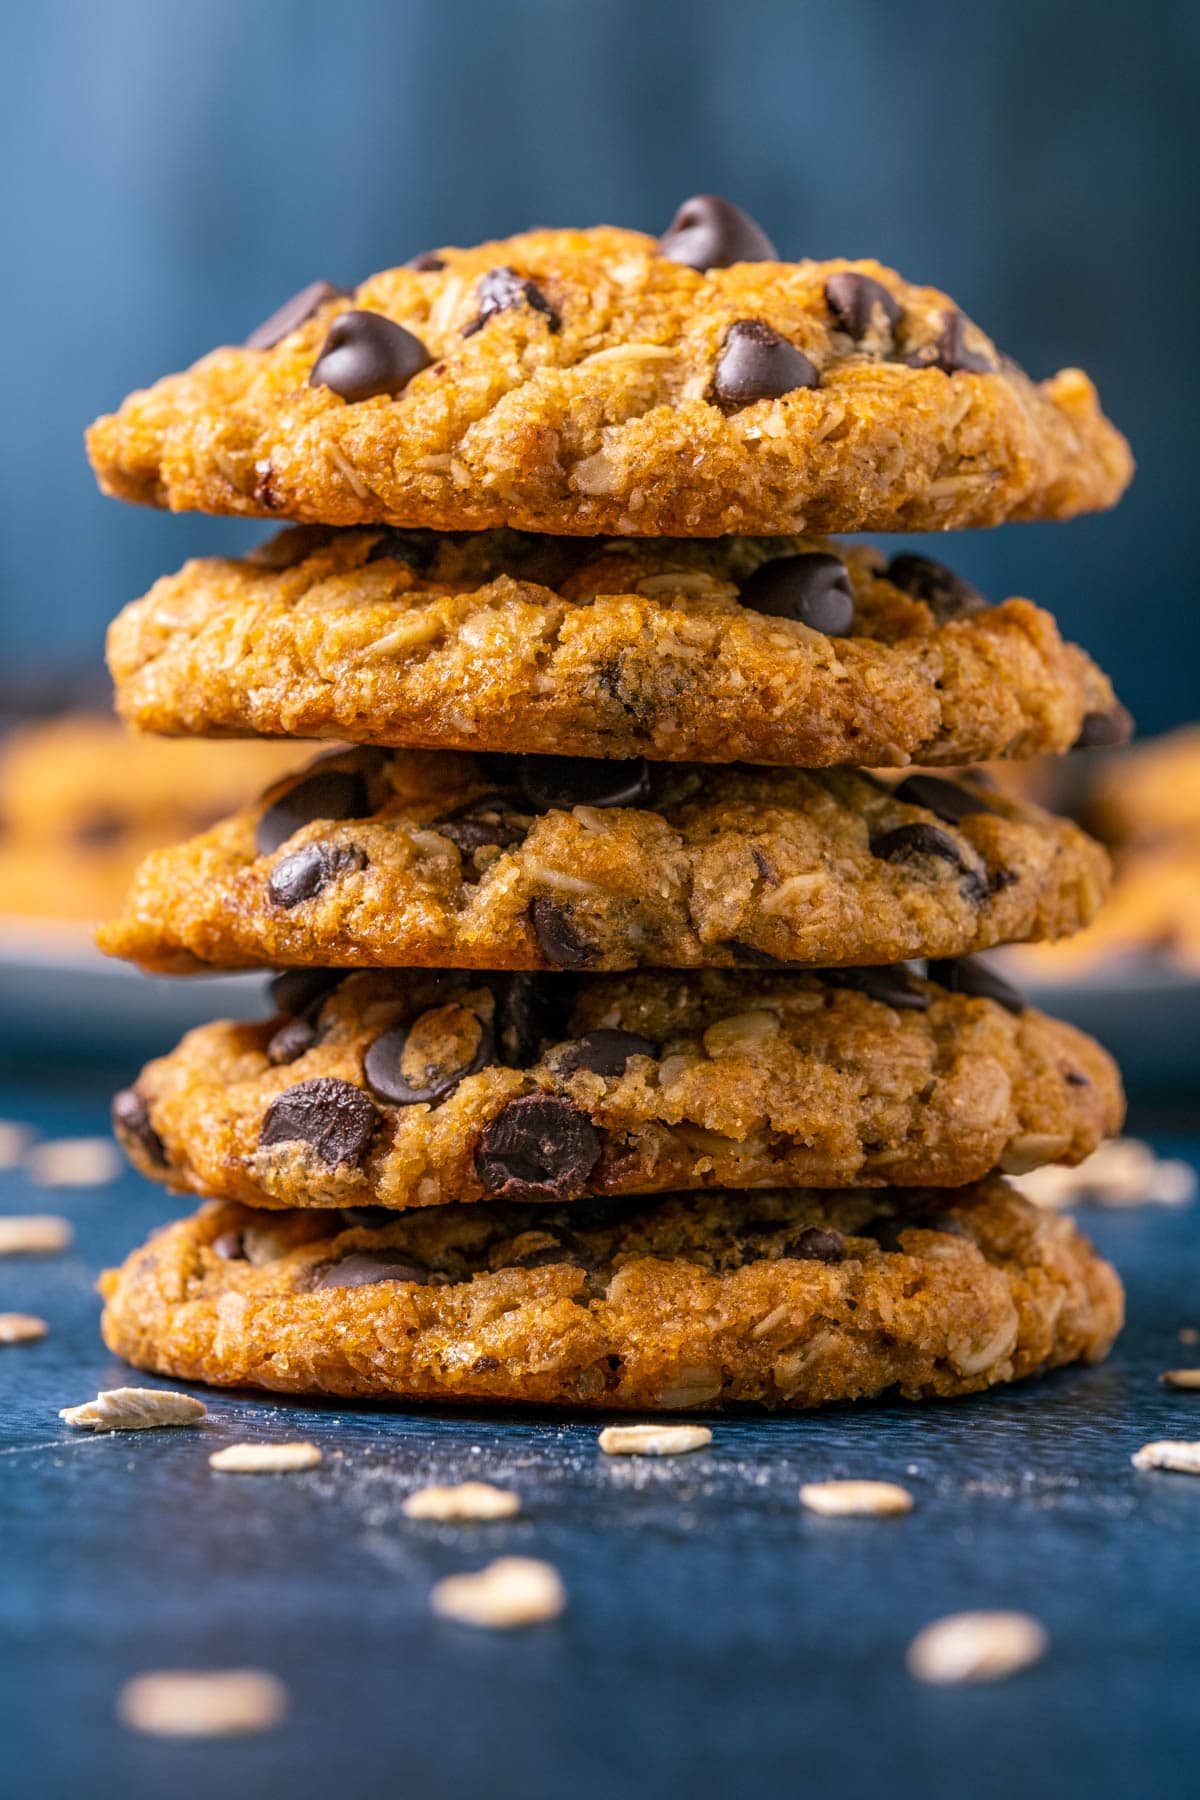 Five oatmeal chocolate chip cookies in a stack.